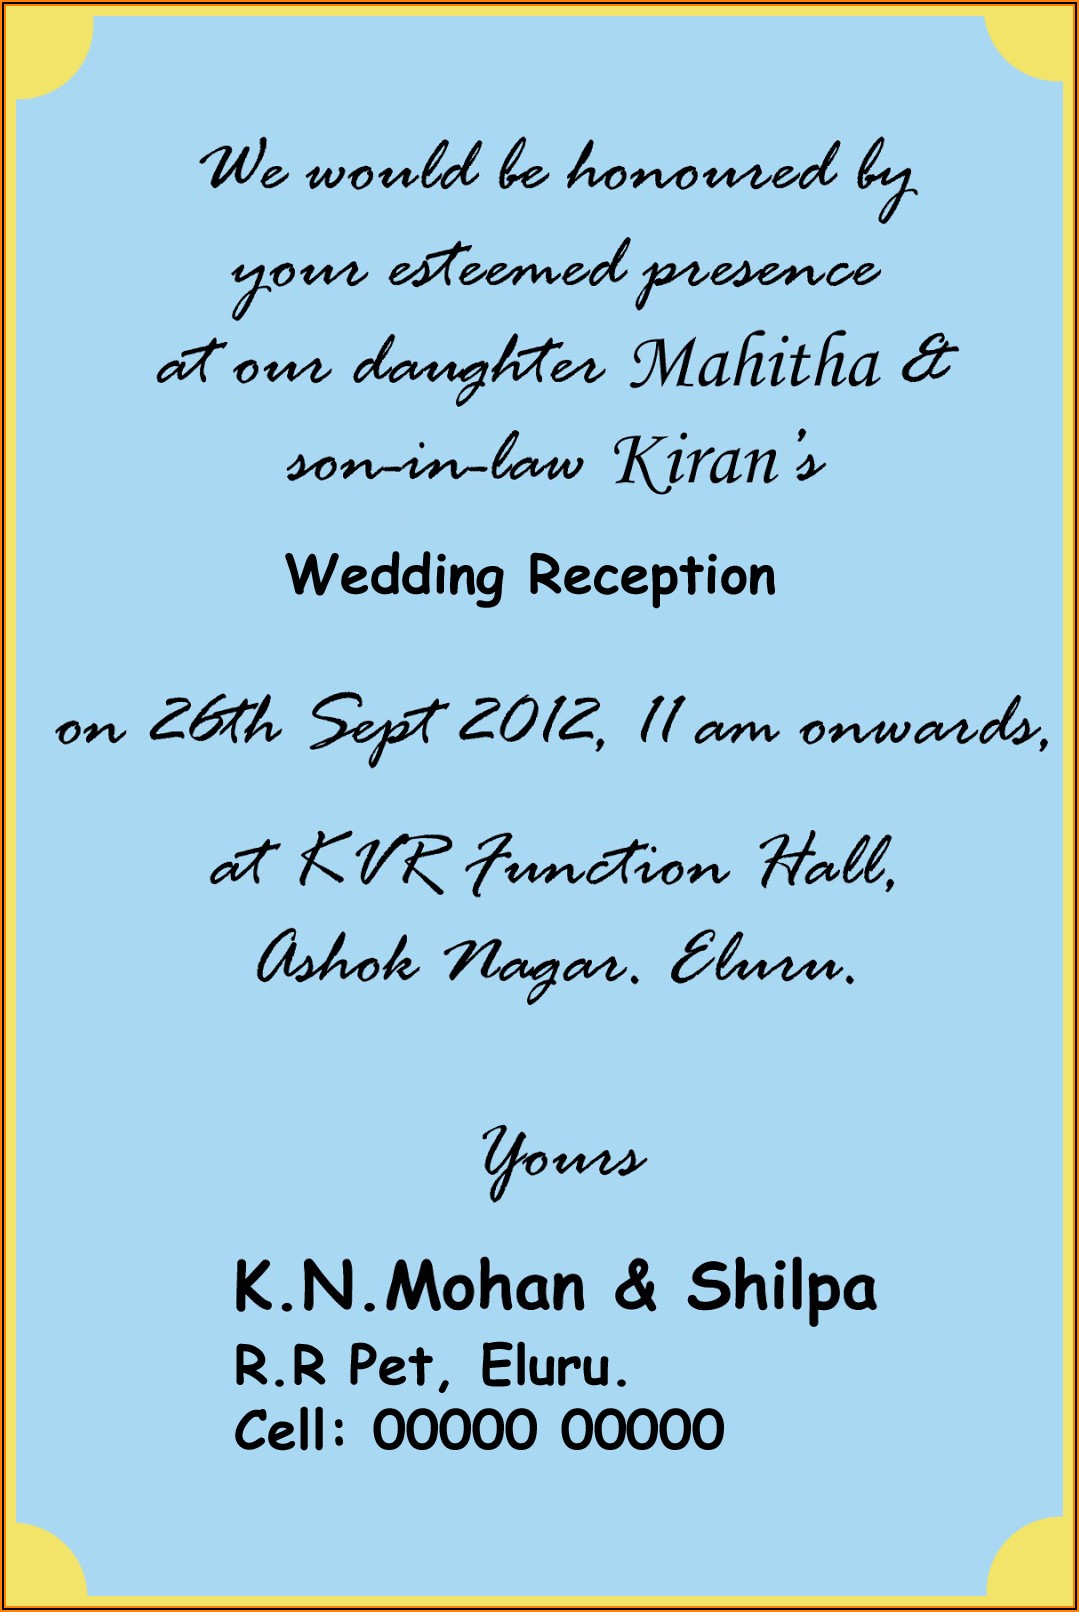 Indian Wedding Invitation Letter In English